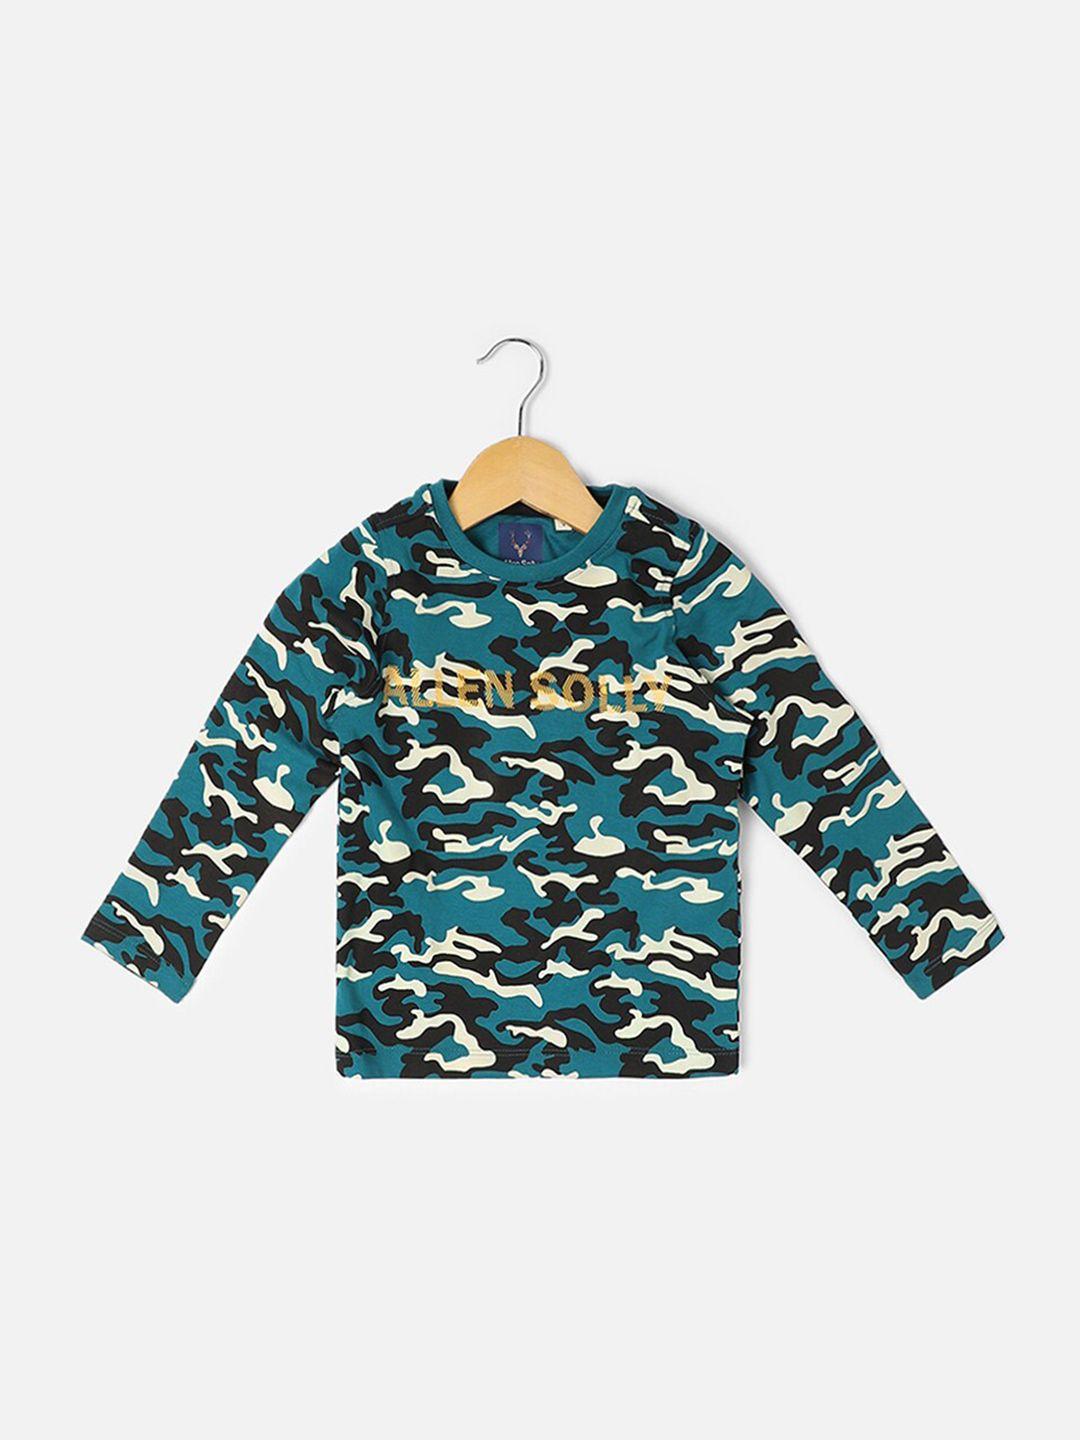 allen solly junior boys camouflage printed t-shirt